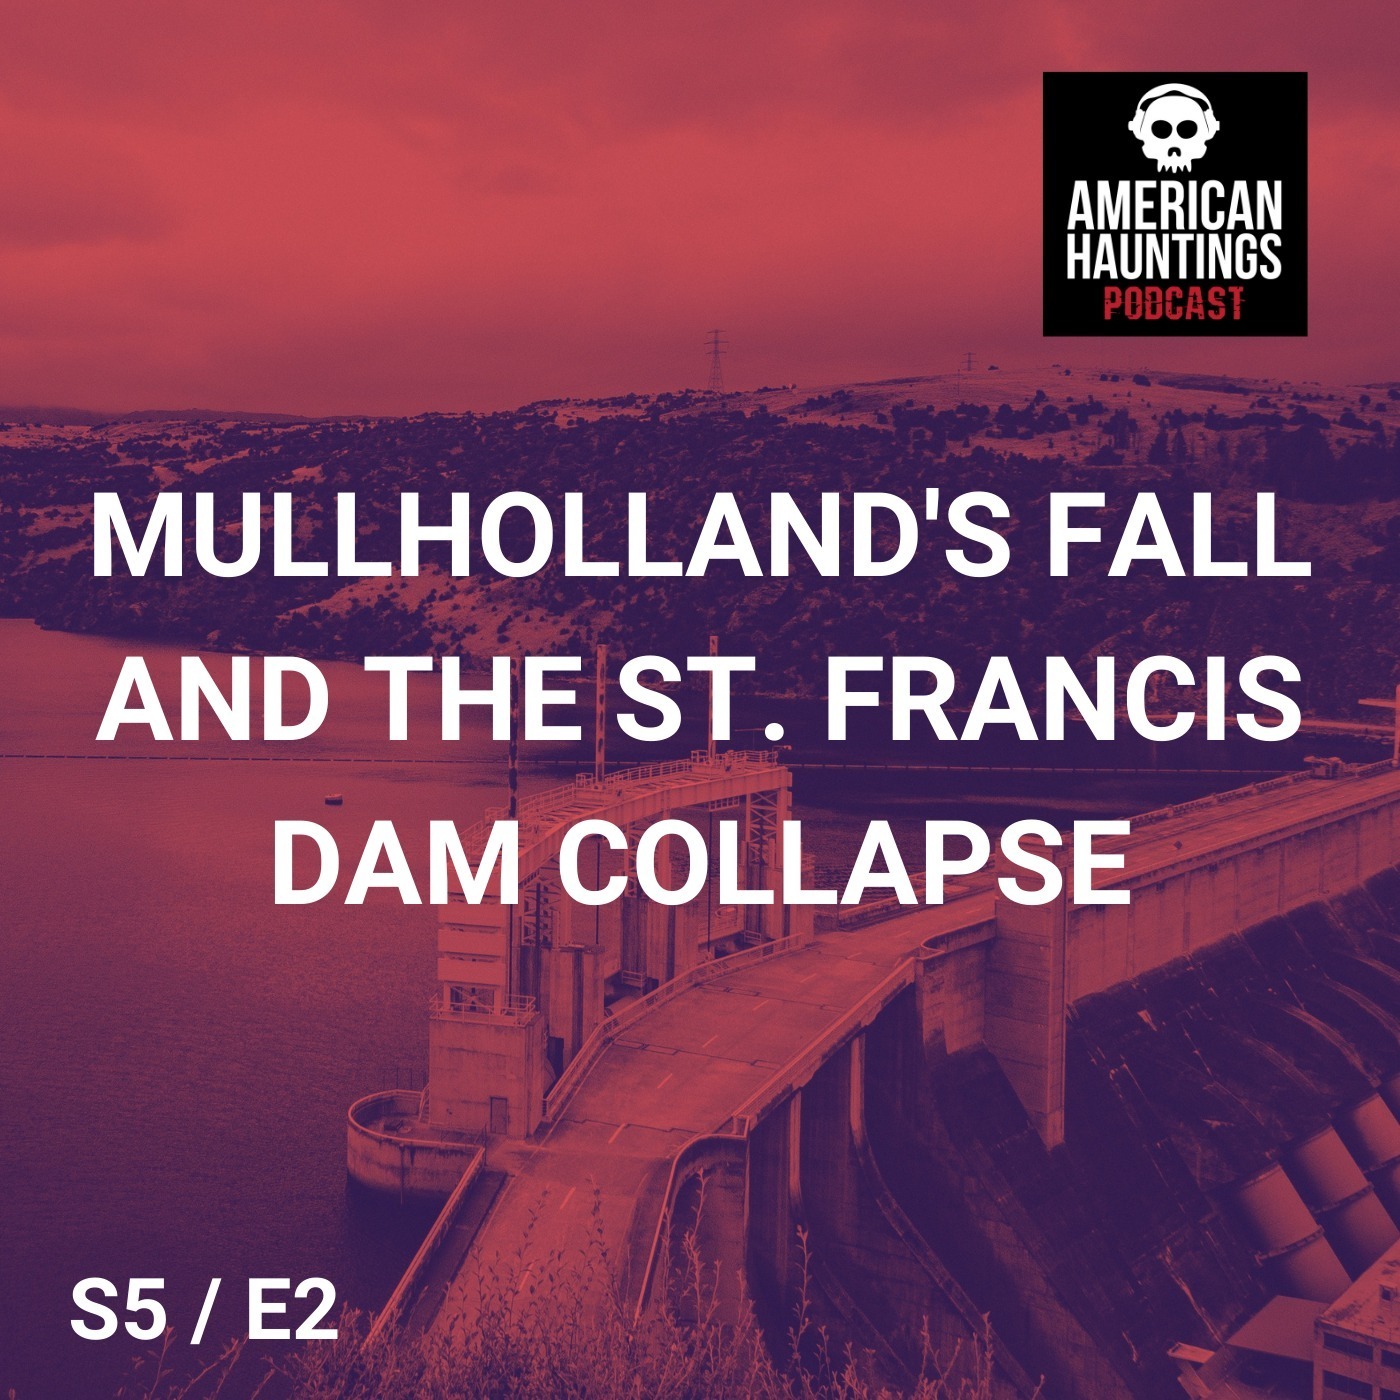 Mullholland’s Fall And The St. Francis Dam Collapse